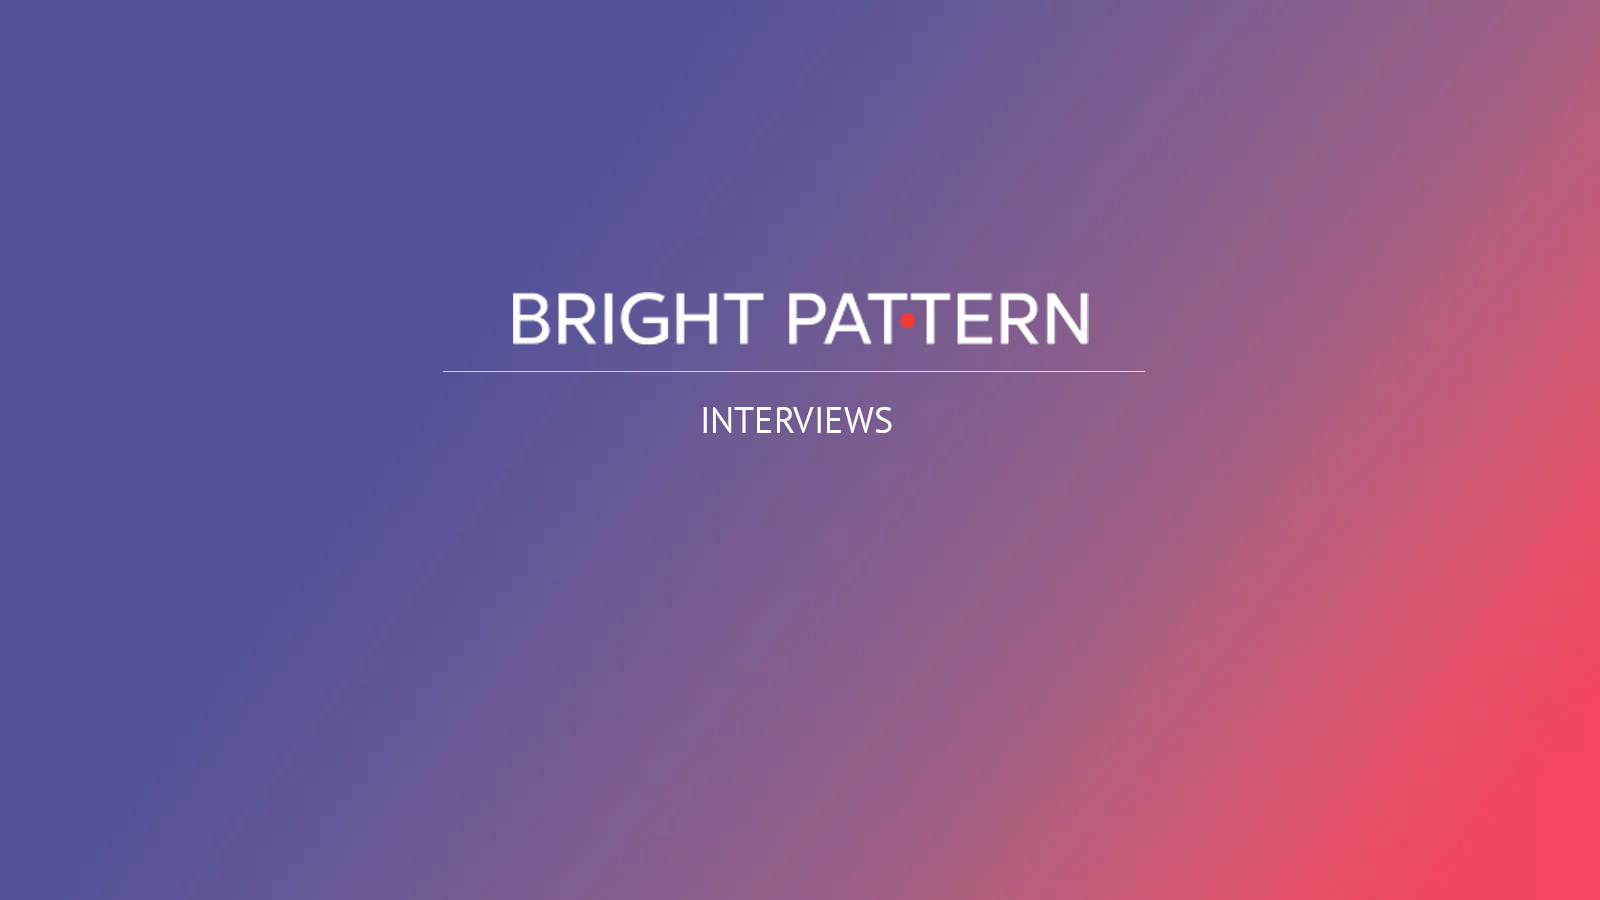 Executive Interview with Ted Hunting, Senior Vice President of Marketing, Bright Pattern